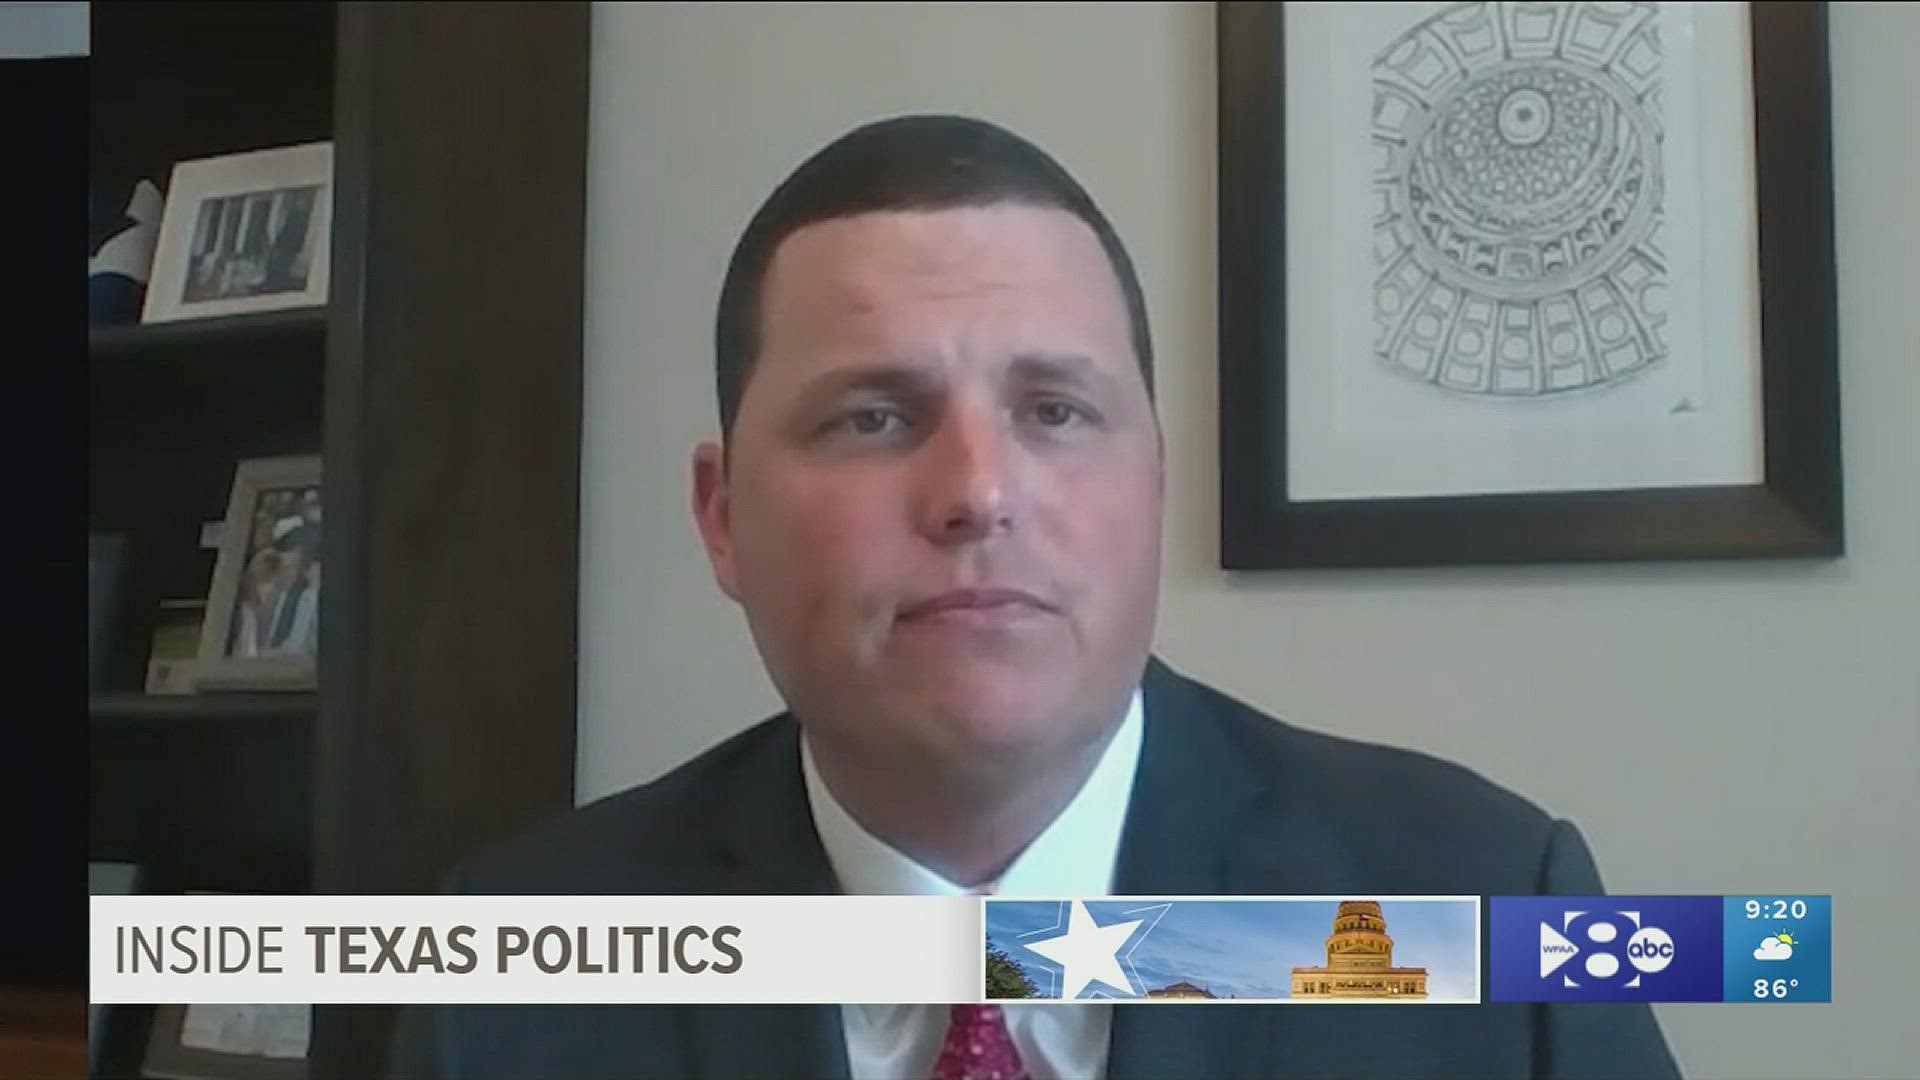 The lawmaker from Frisco, Texas, says parents don't stand a chance against social media giants.